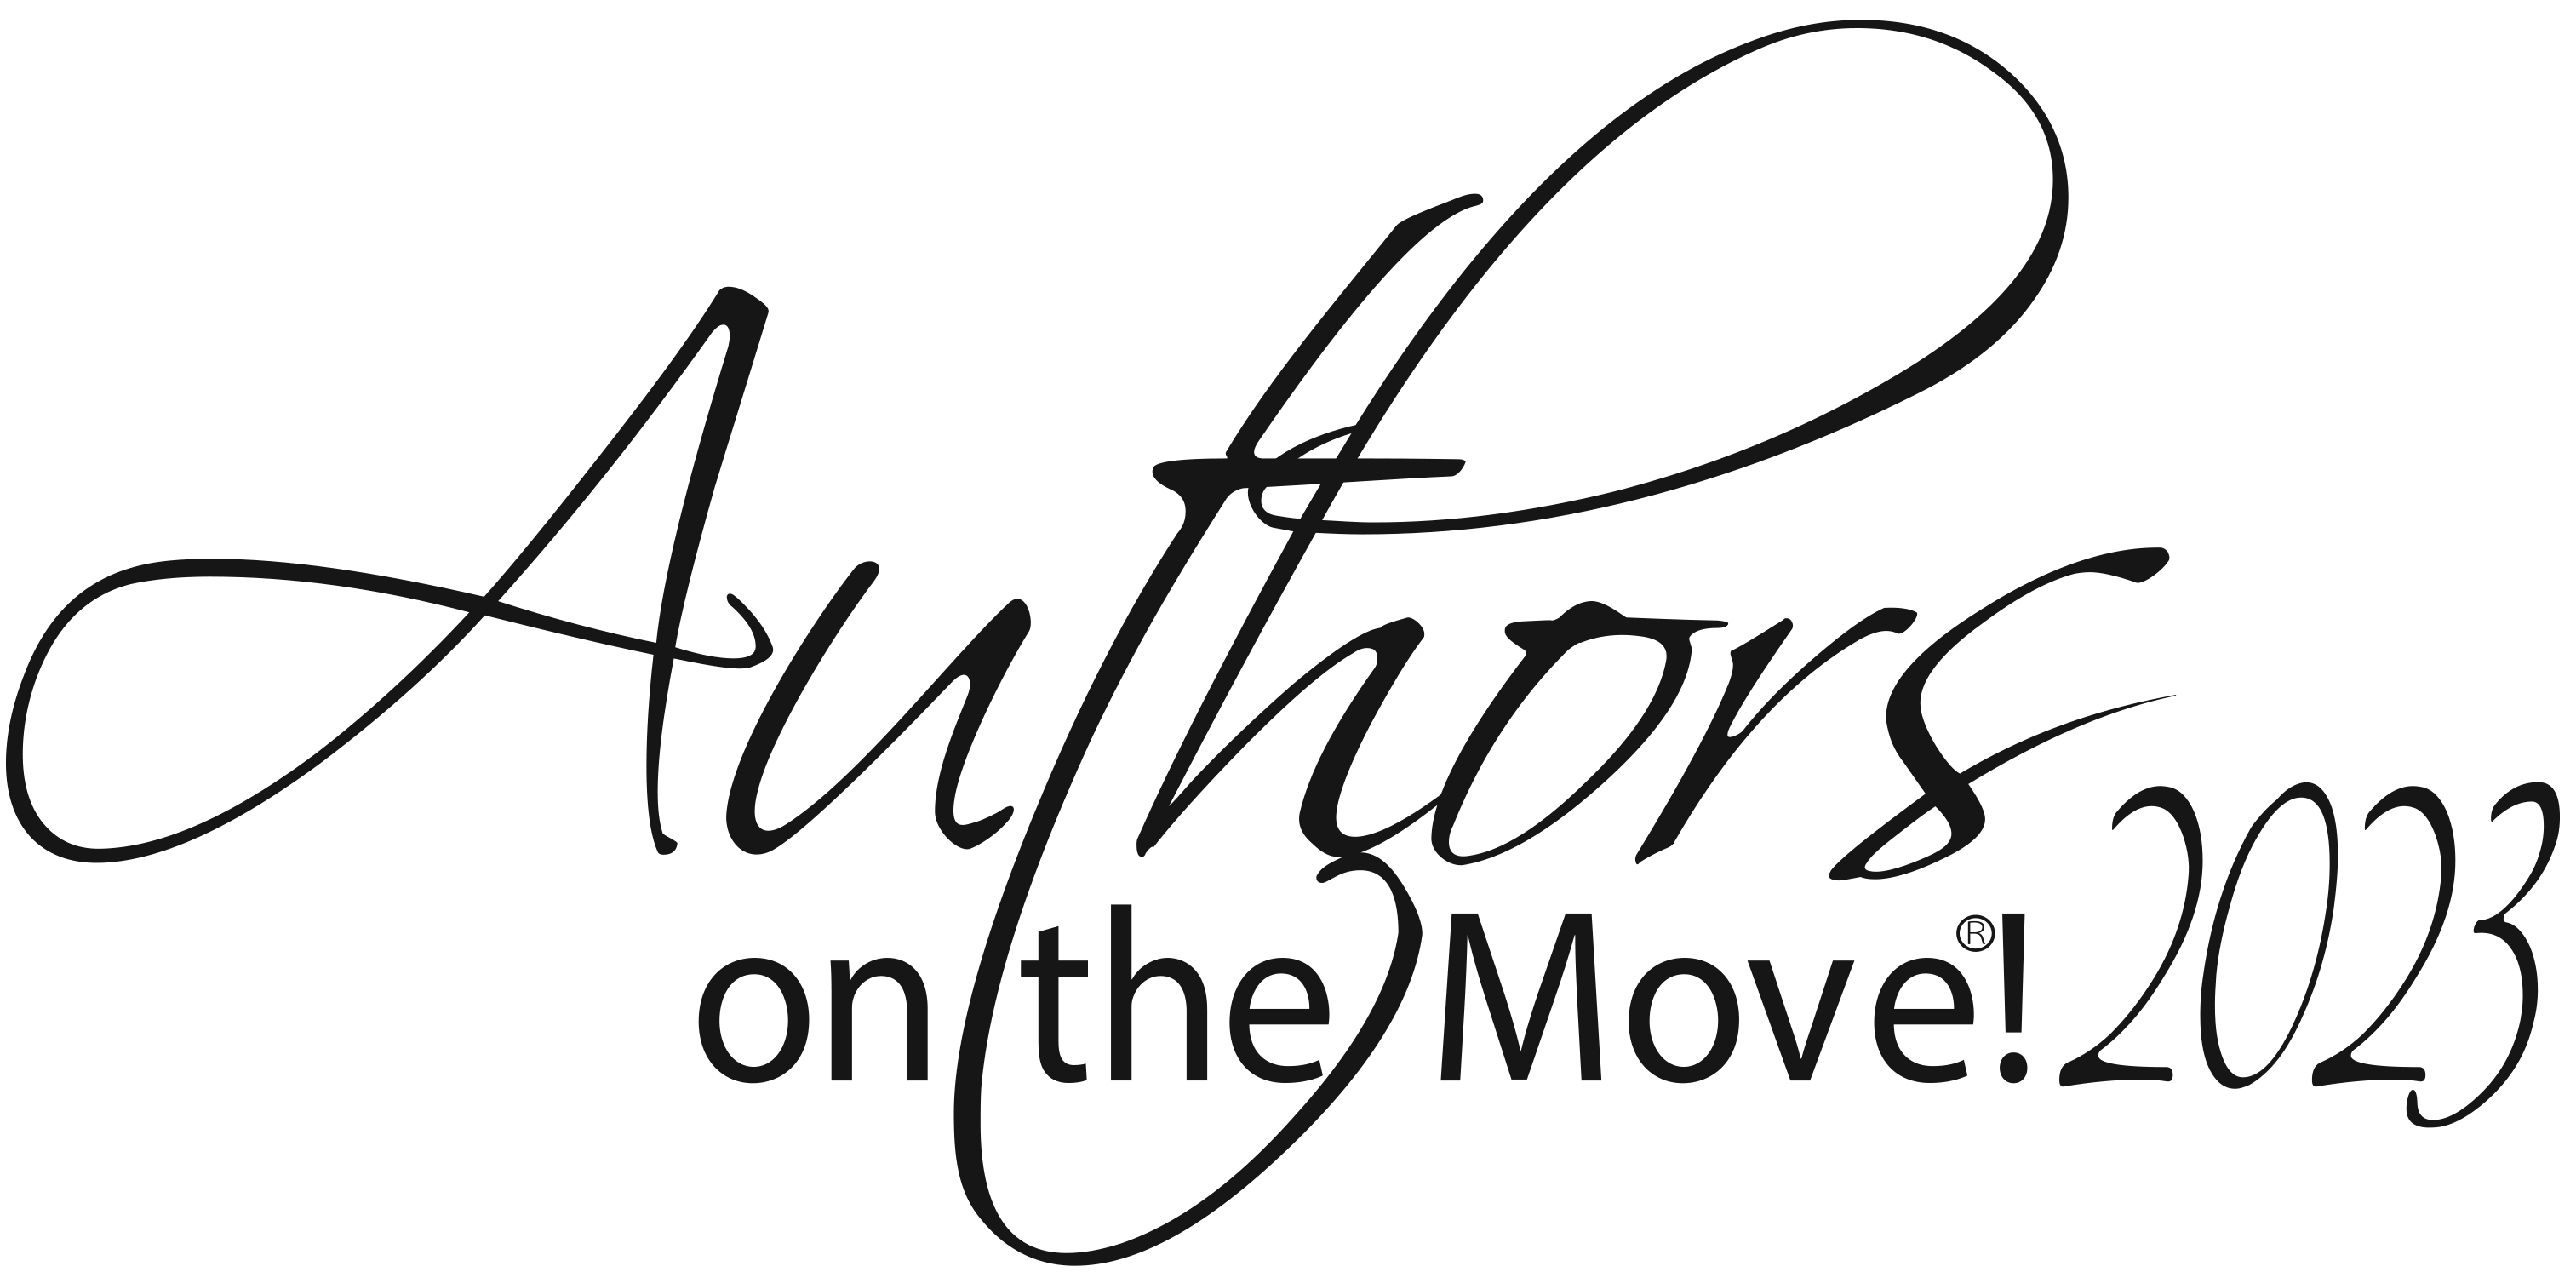 Official Authors on the Move! 2022 Logo